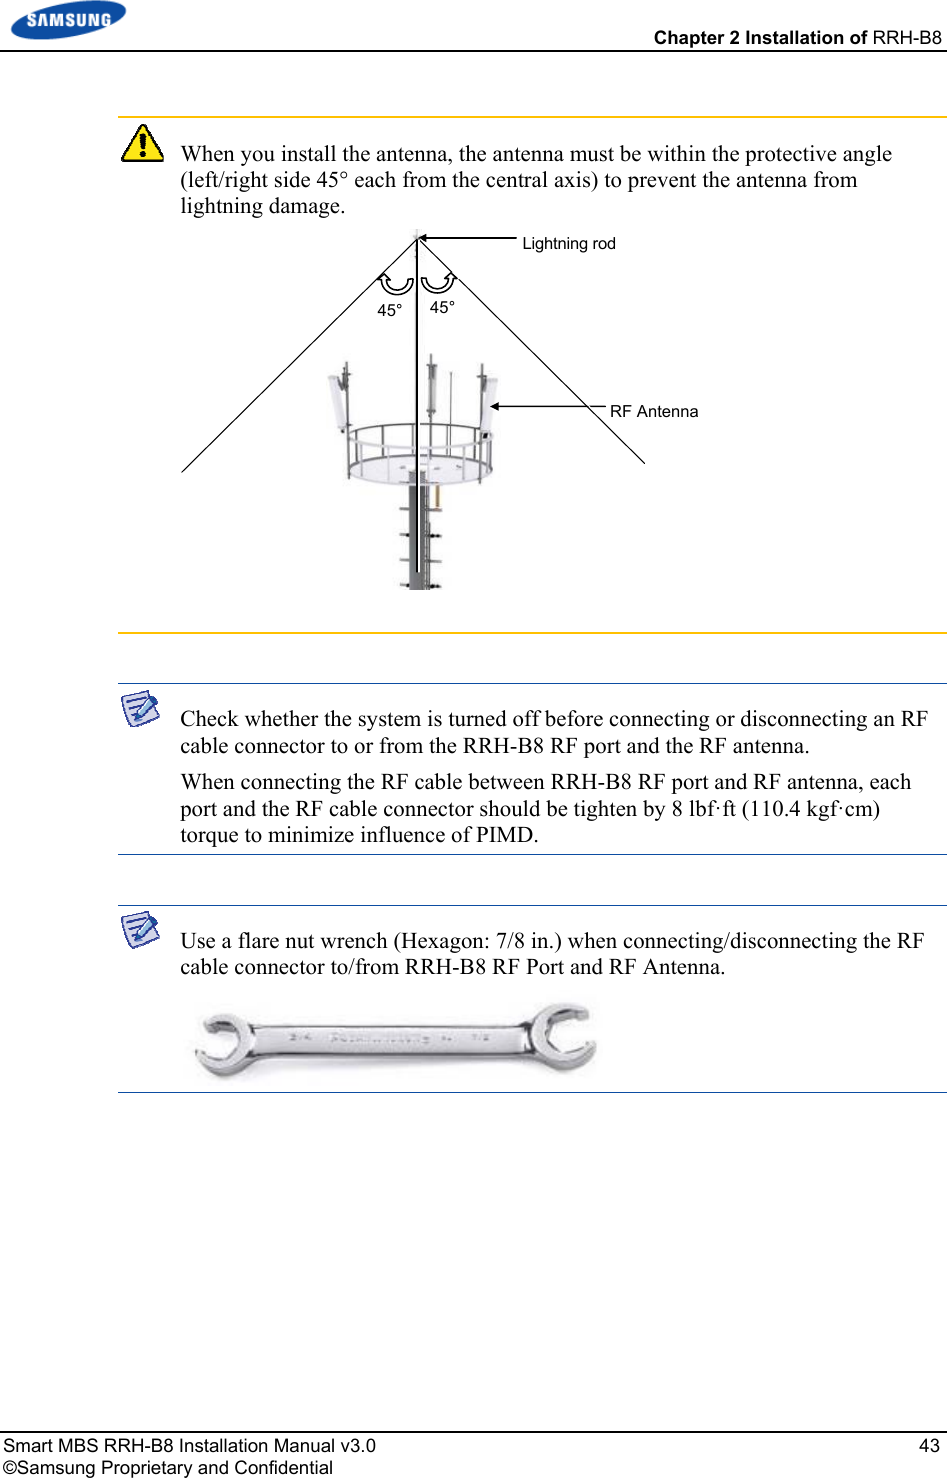  Chapter 2 Installation of RRH-B8 Smart MBS RRH-B8 Installation Manual v3.0   43 ©Samsung Proprietary and Confidential   When you install the antenna, the antenna must be within the protective angle (left/right side 45° each from the central axis) to prevent the antenna from lightning damage.      Check whether the system is turned off before connecting or disconnecting an RF cable connector to or from the RRH-B8 RF port and the RF antenna.   When connecting the RF cable between RRH-B8 RF port and RF antenna, each port and the RF cable connector should be tighten by 8 lbf·ft (110.4 kgf·cm) torque to minimize influence of PIMD.   Use a flare nut wrench (Hexagon: 7/8 in.) when connecting/disconnecting the RF cable connector to/from RRH-B8 RF Port and RF Antenna.     Lightning rod 45°45°RF Antenna 